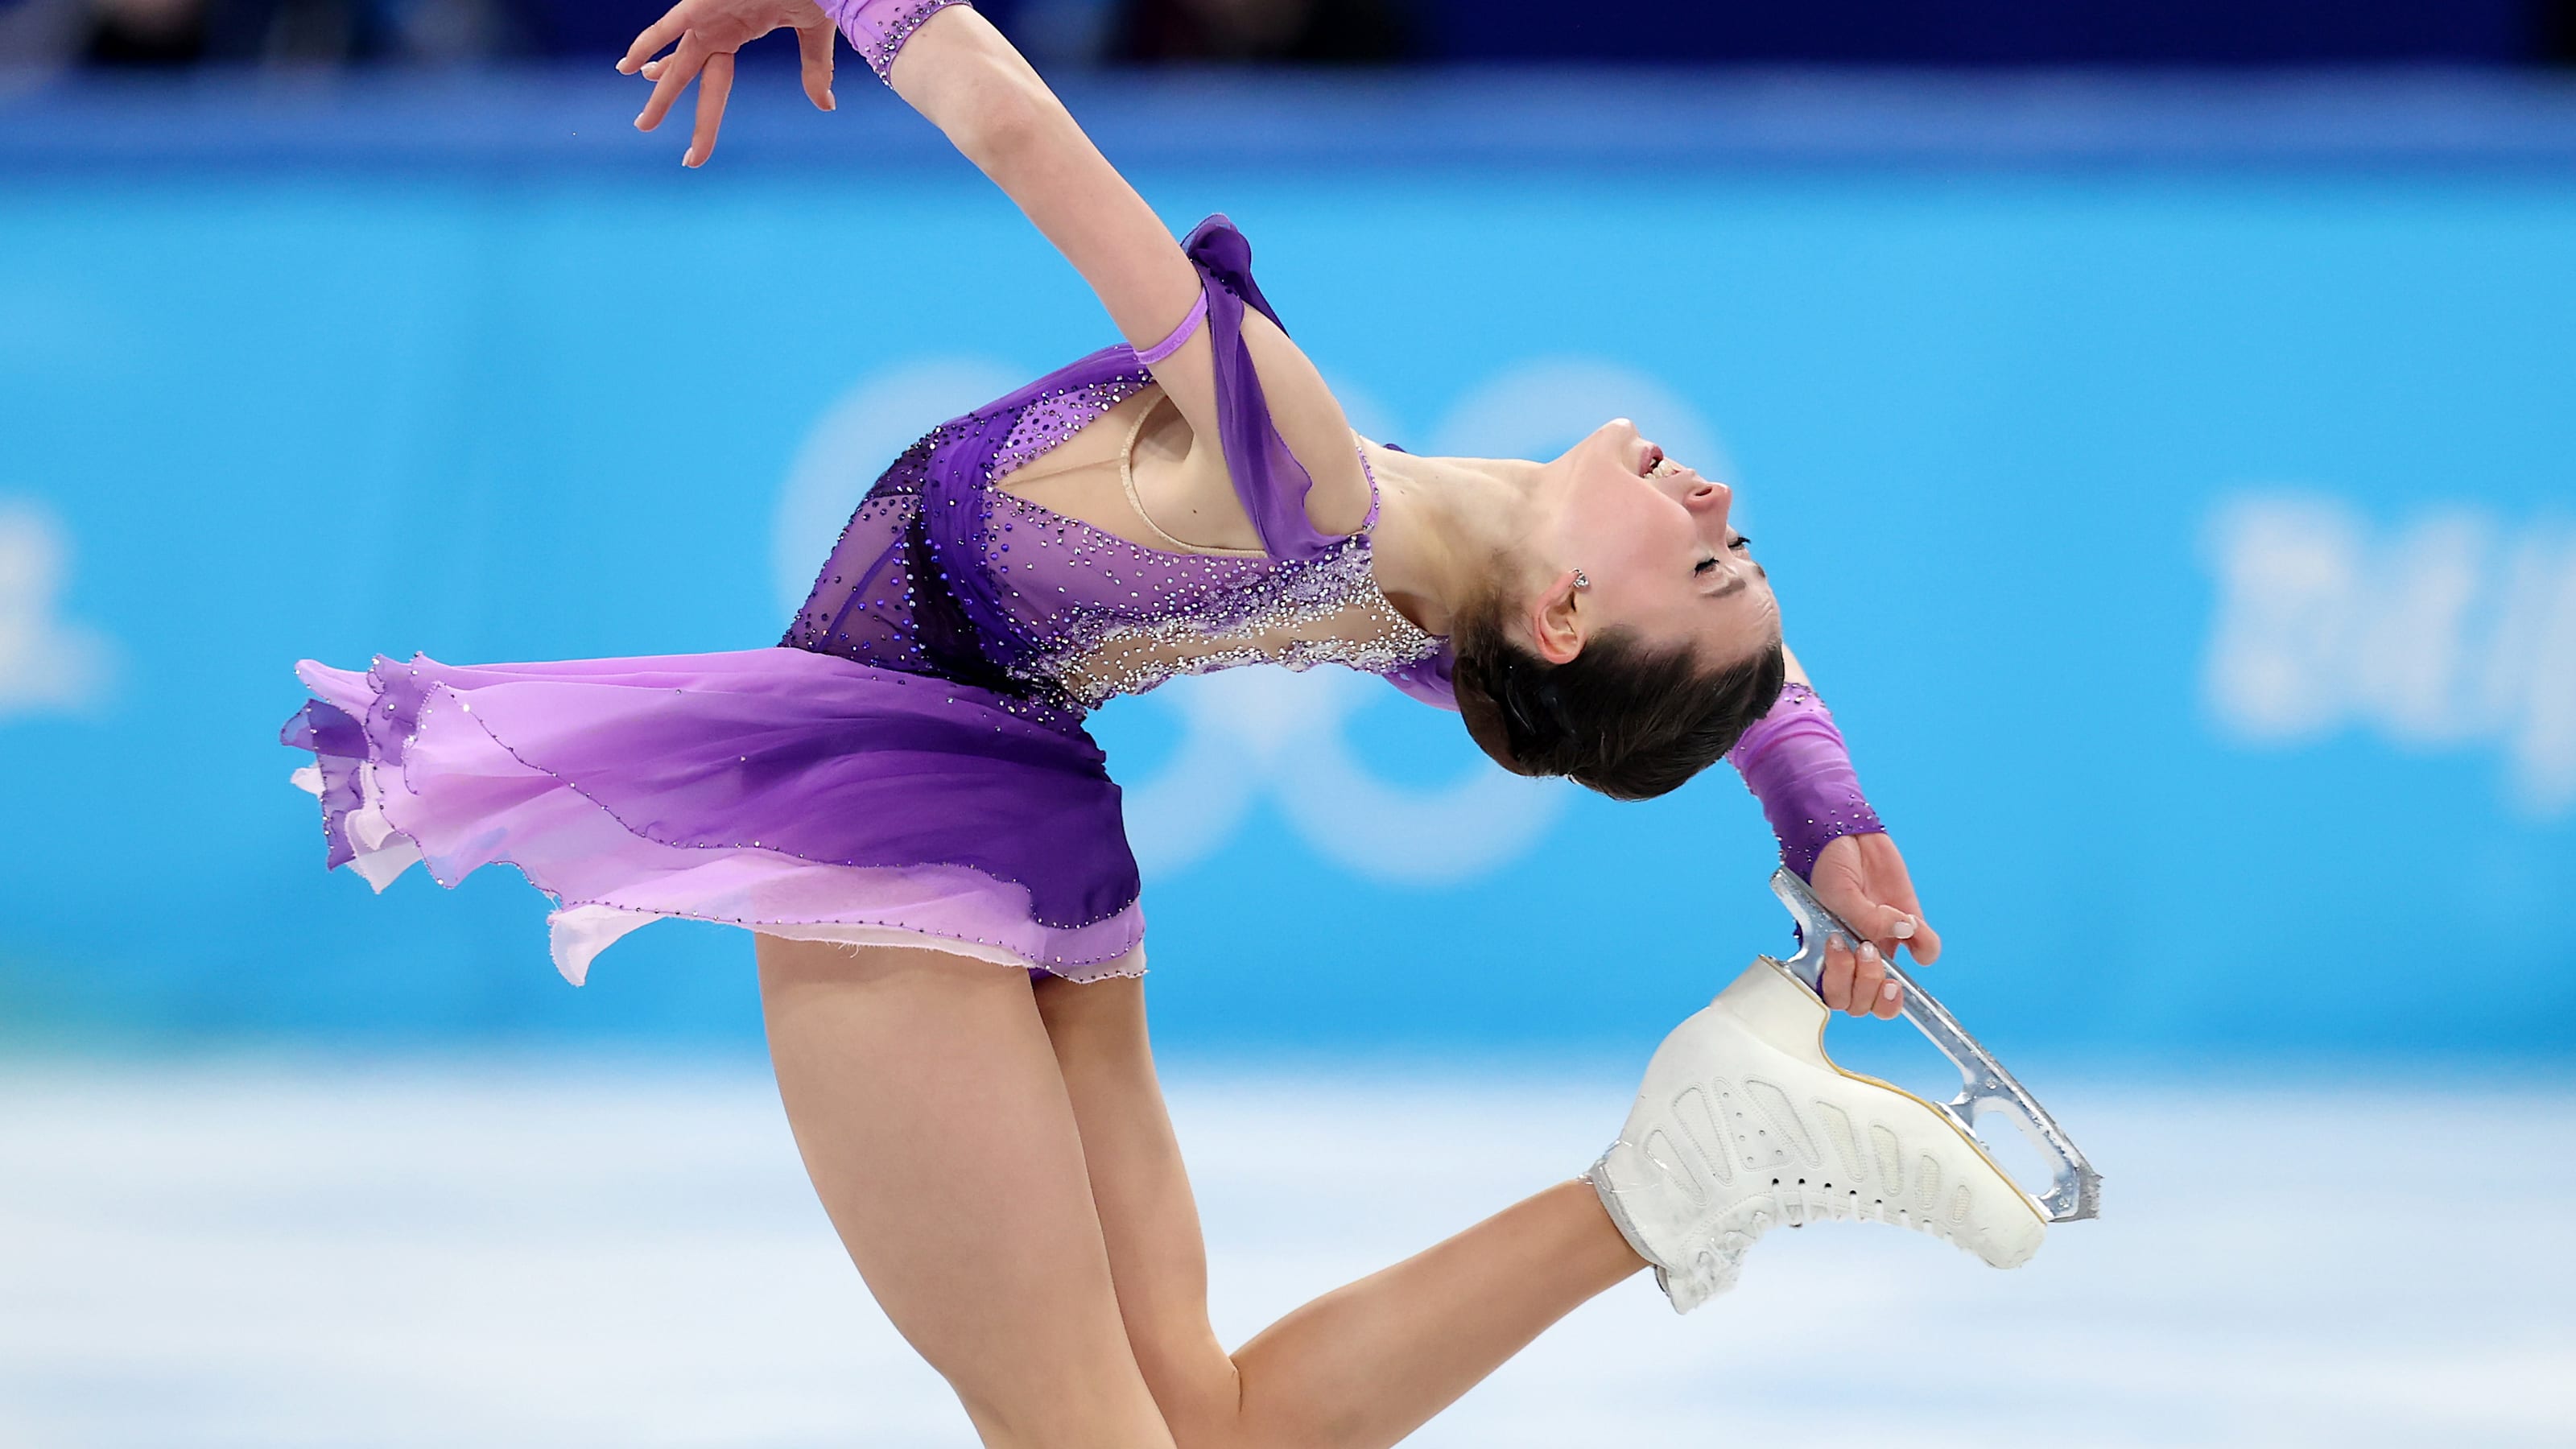 Ice Skating Schedule Olympics 2022 Figure Skating At Beijing 2022: Full Schedule Of Olympic Winter Games  Competition And Where To Watch